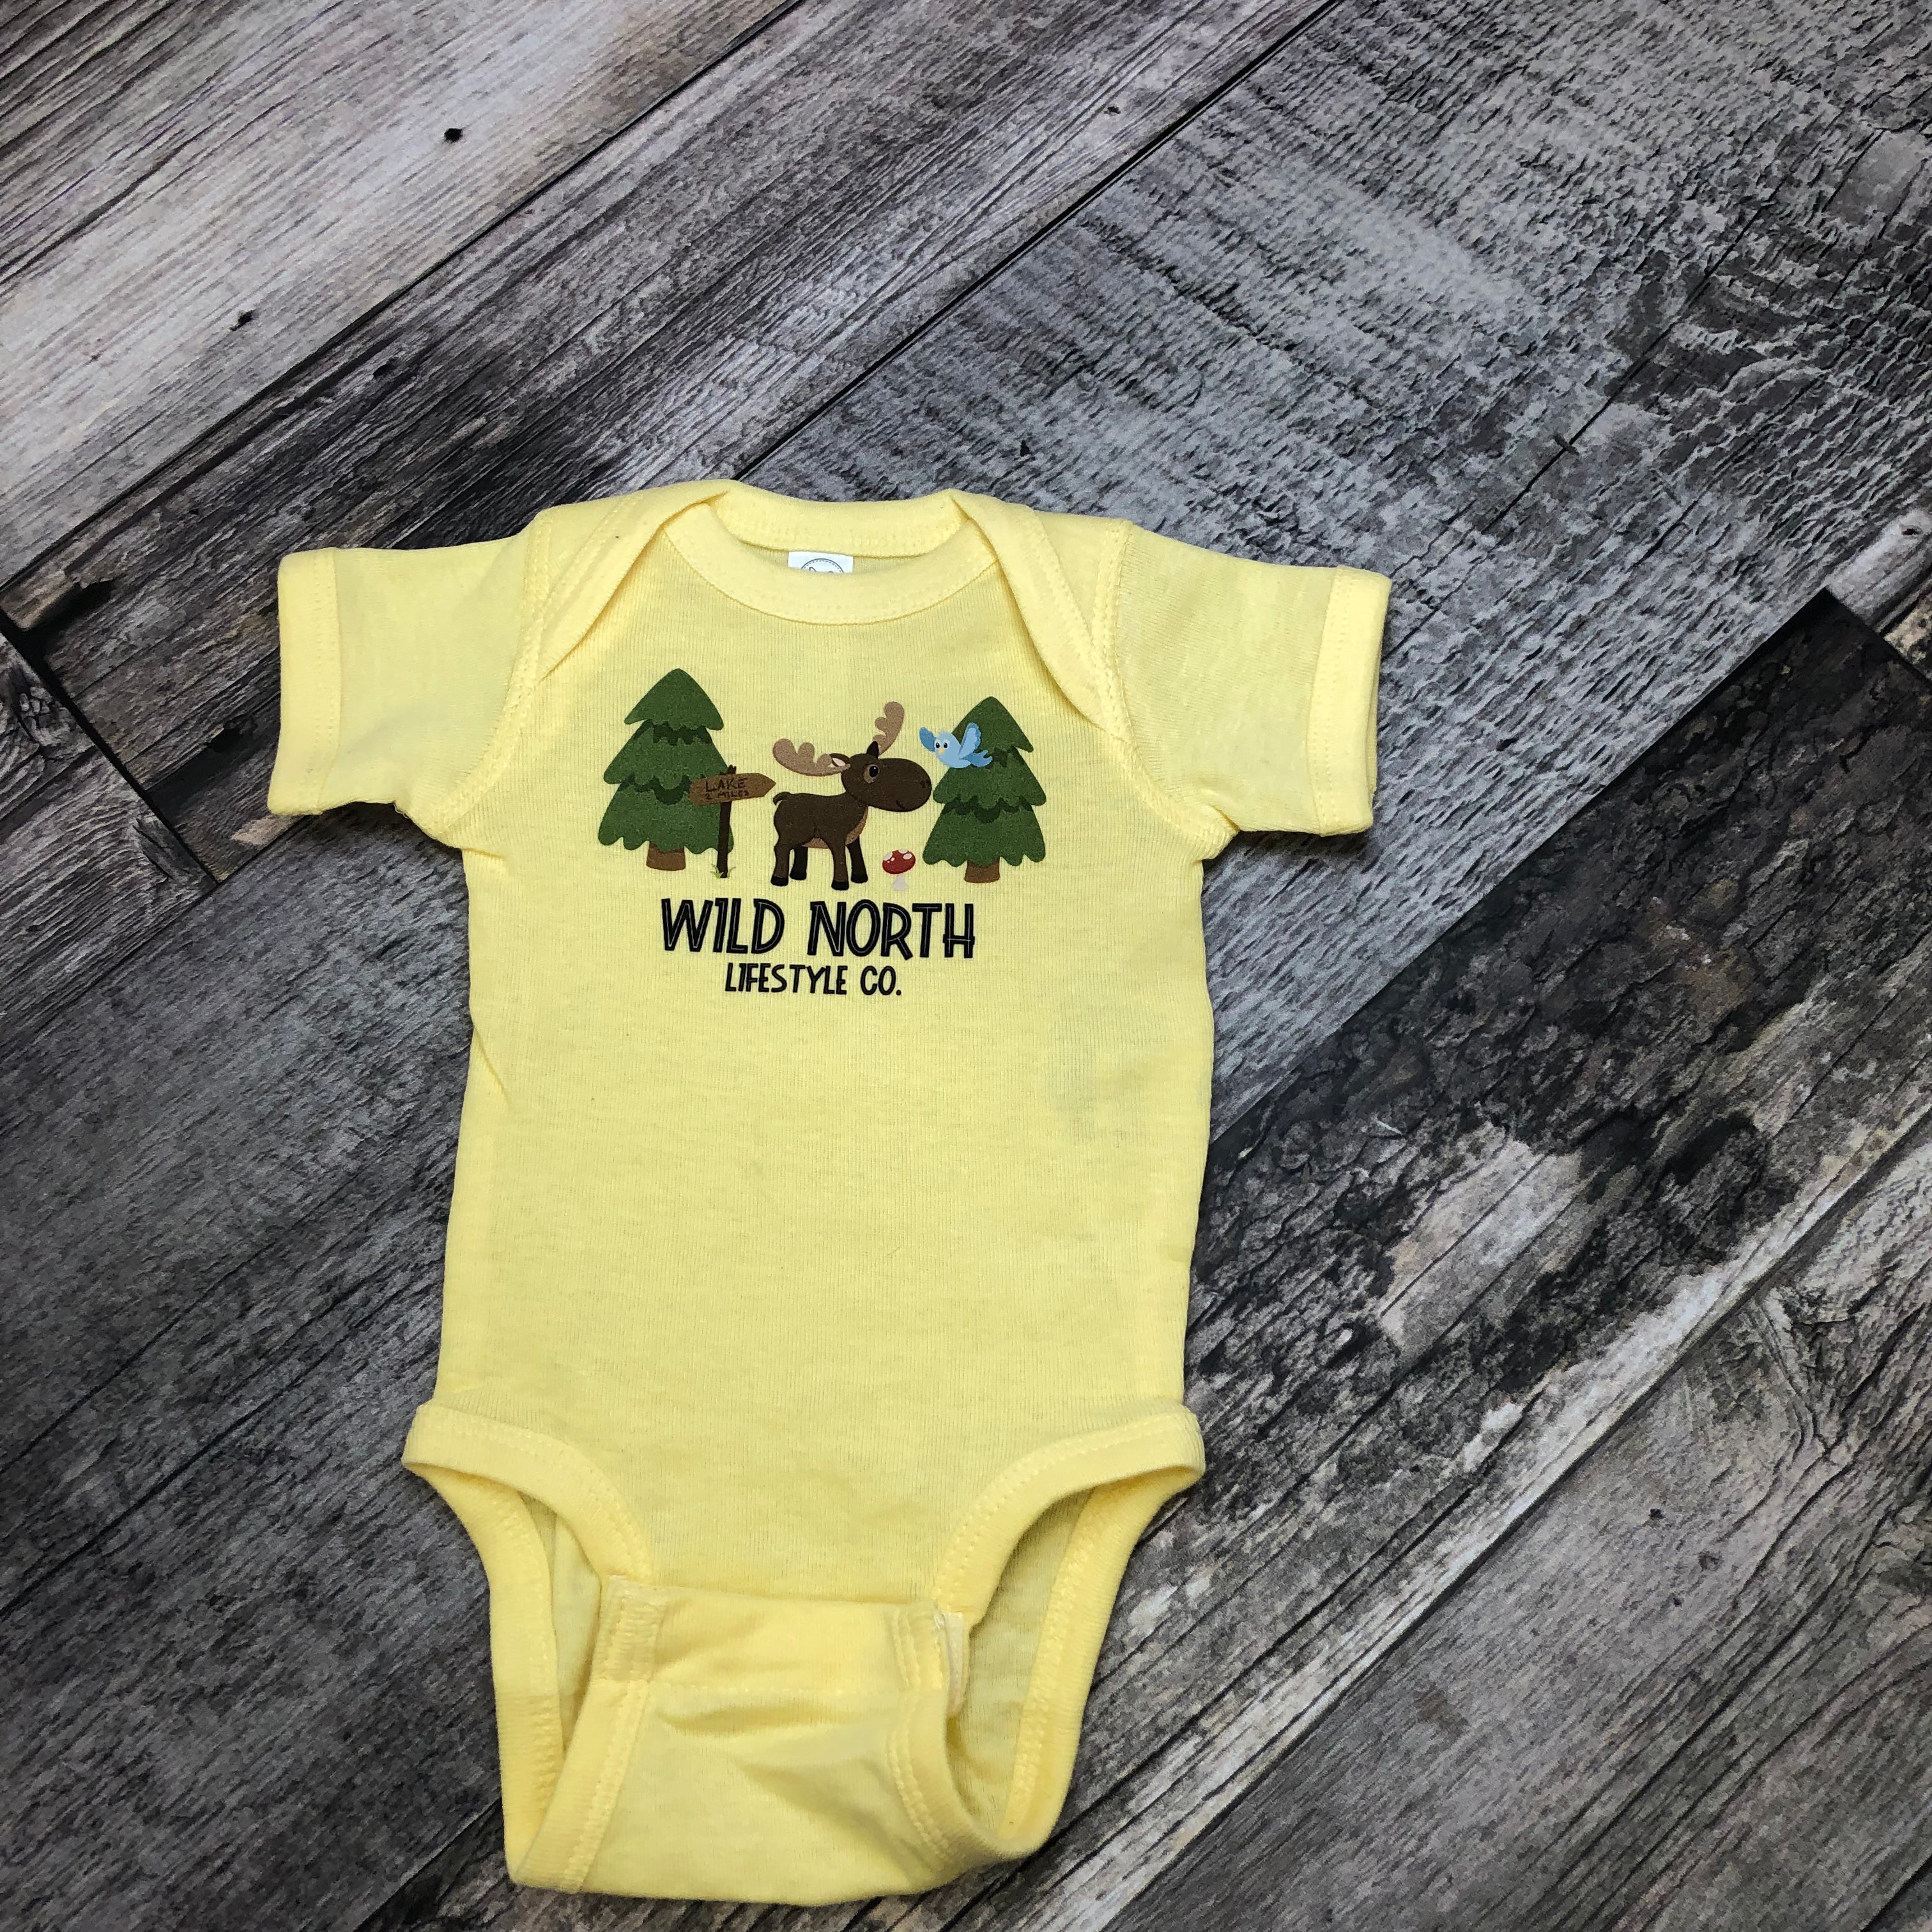 Wild Northling "In the forest" Moose Onesie